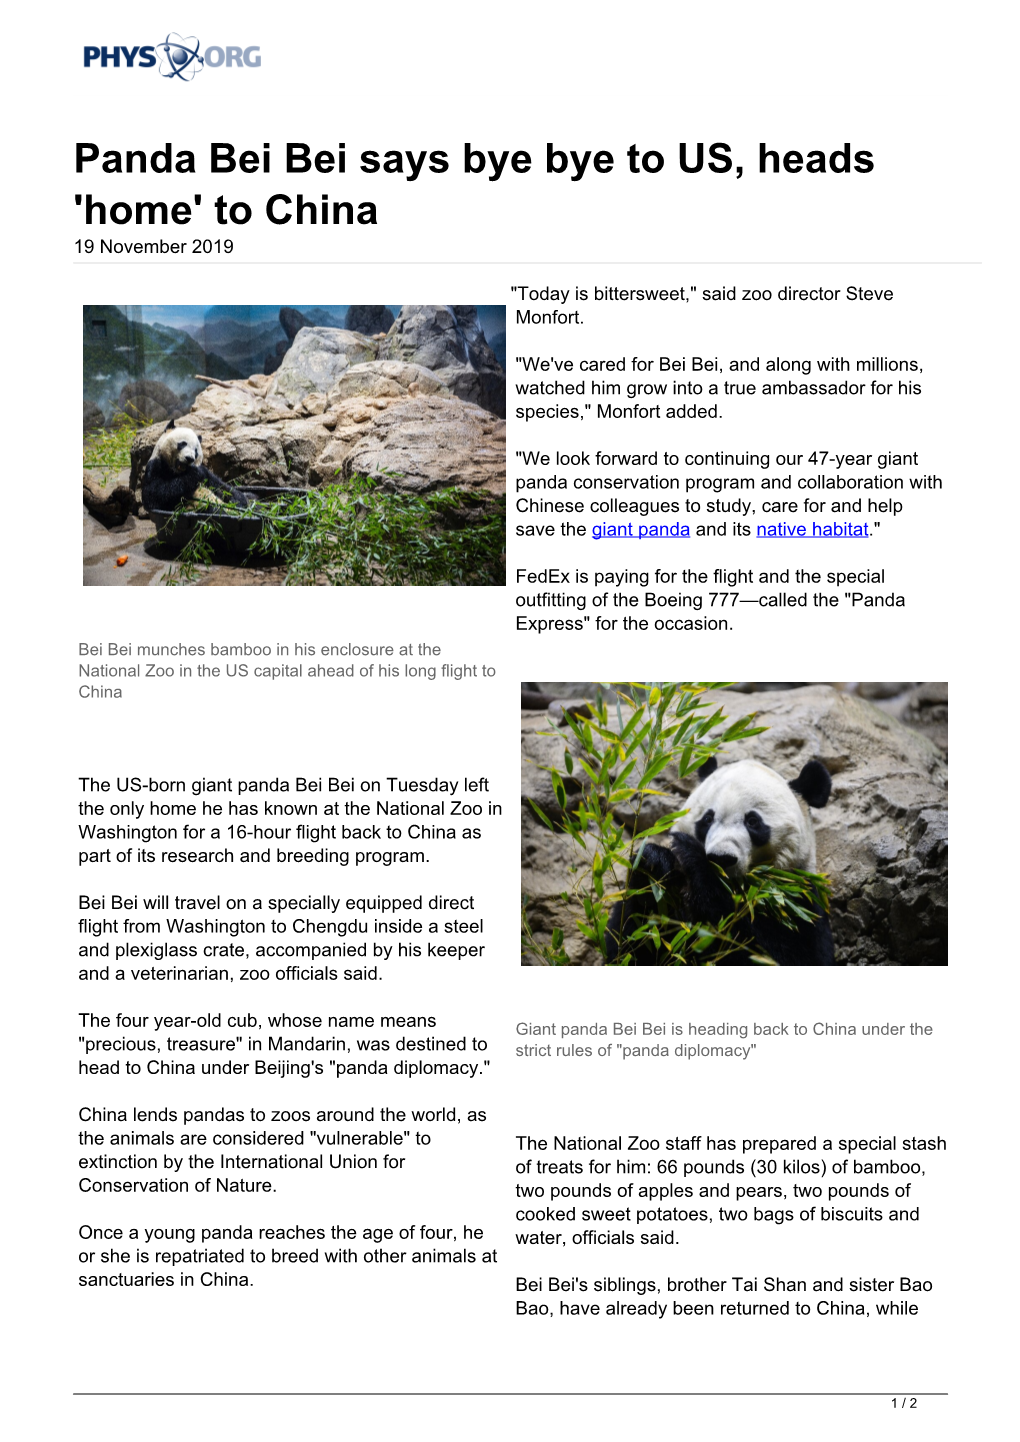 Panda Bei Bei Says Bye Bye to US, Heads 'Home' to China 19 November 2019